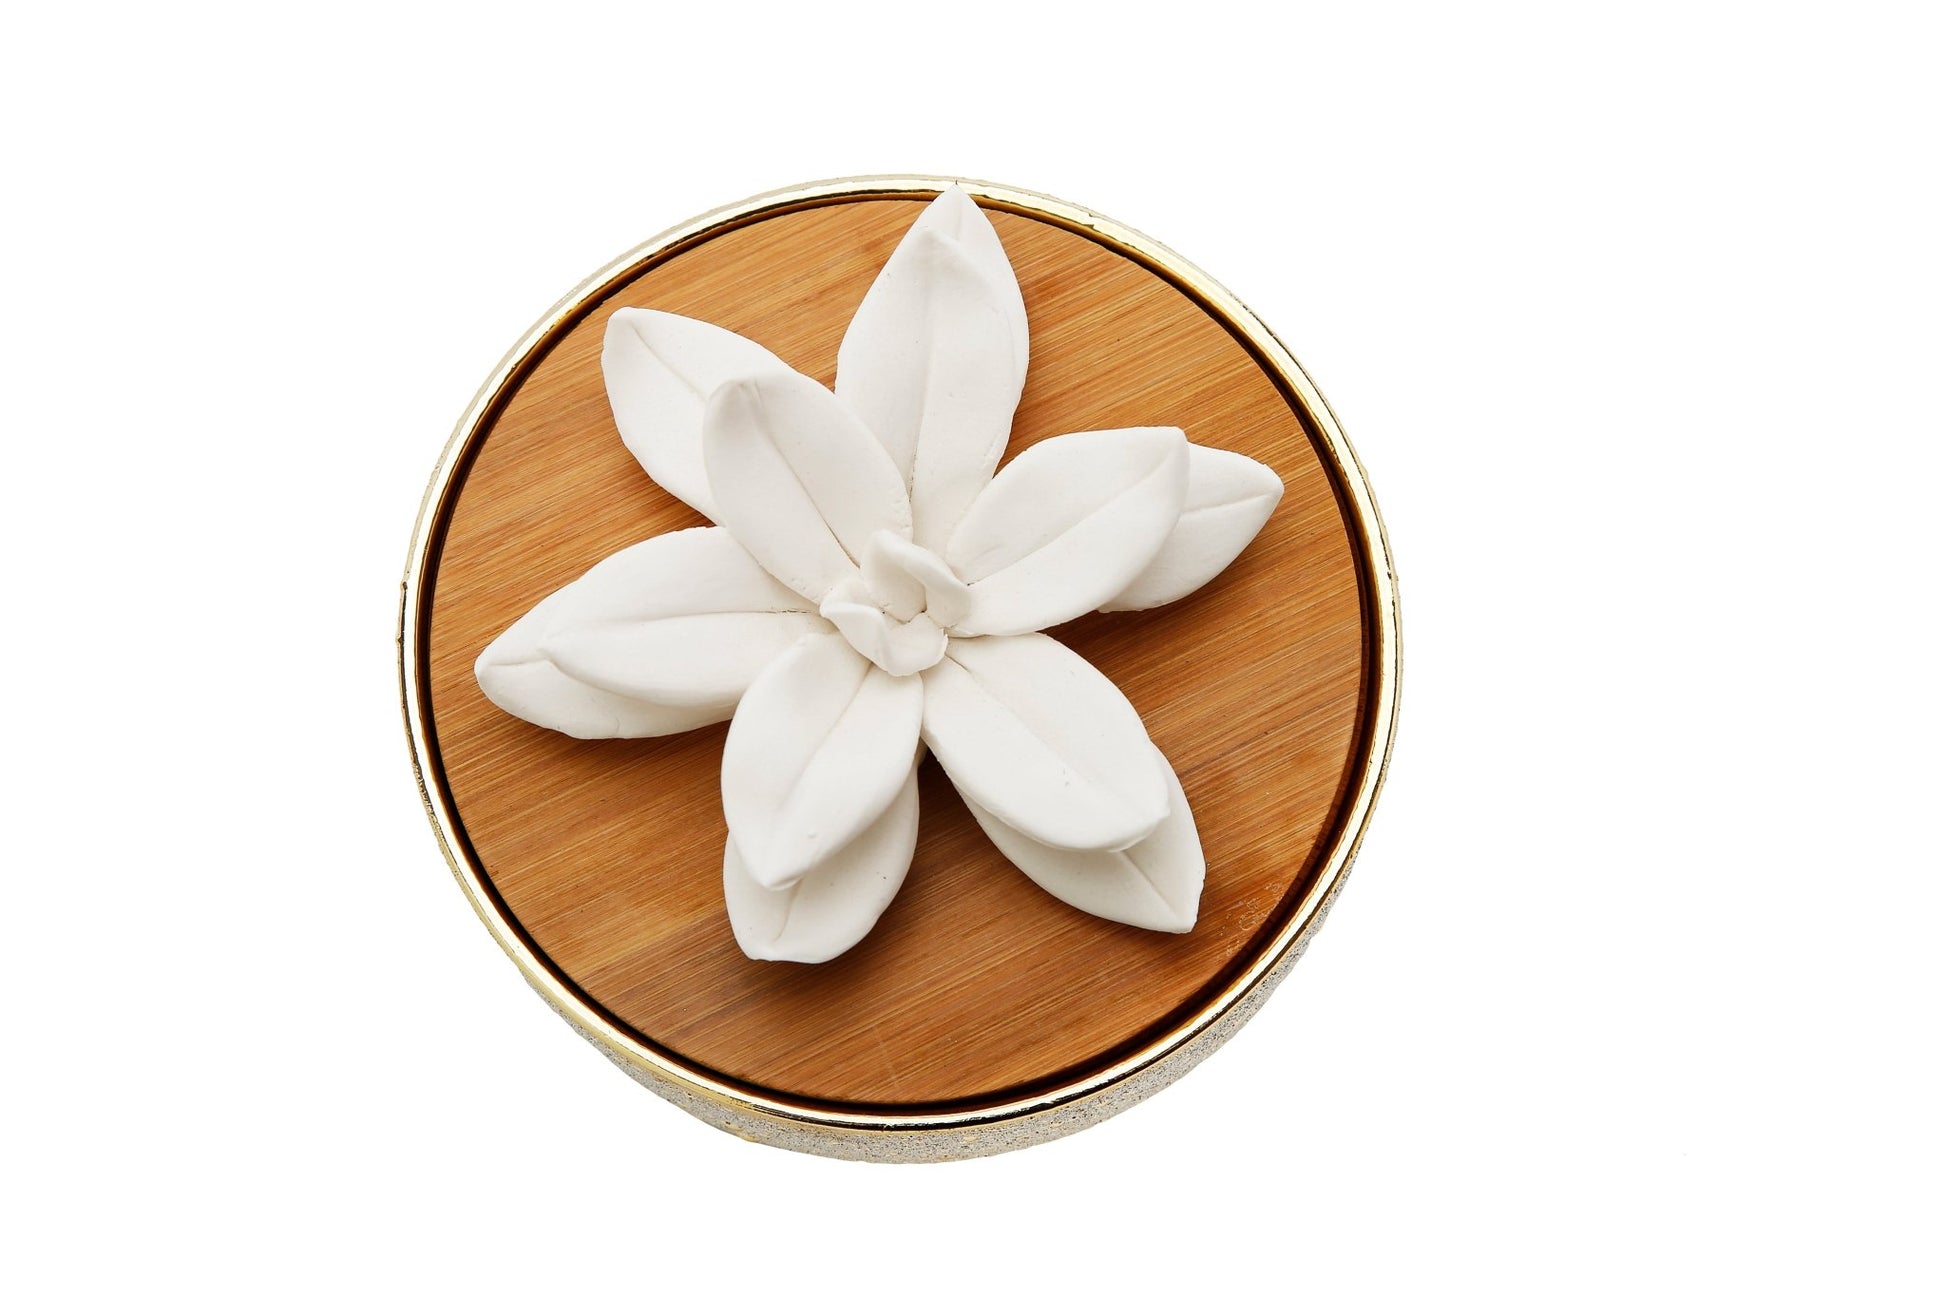 Gold Hemispheric Shaped Diffuser with White Flower, “Lily of the Valley” aroma - HOUSE OF SHE